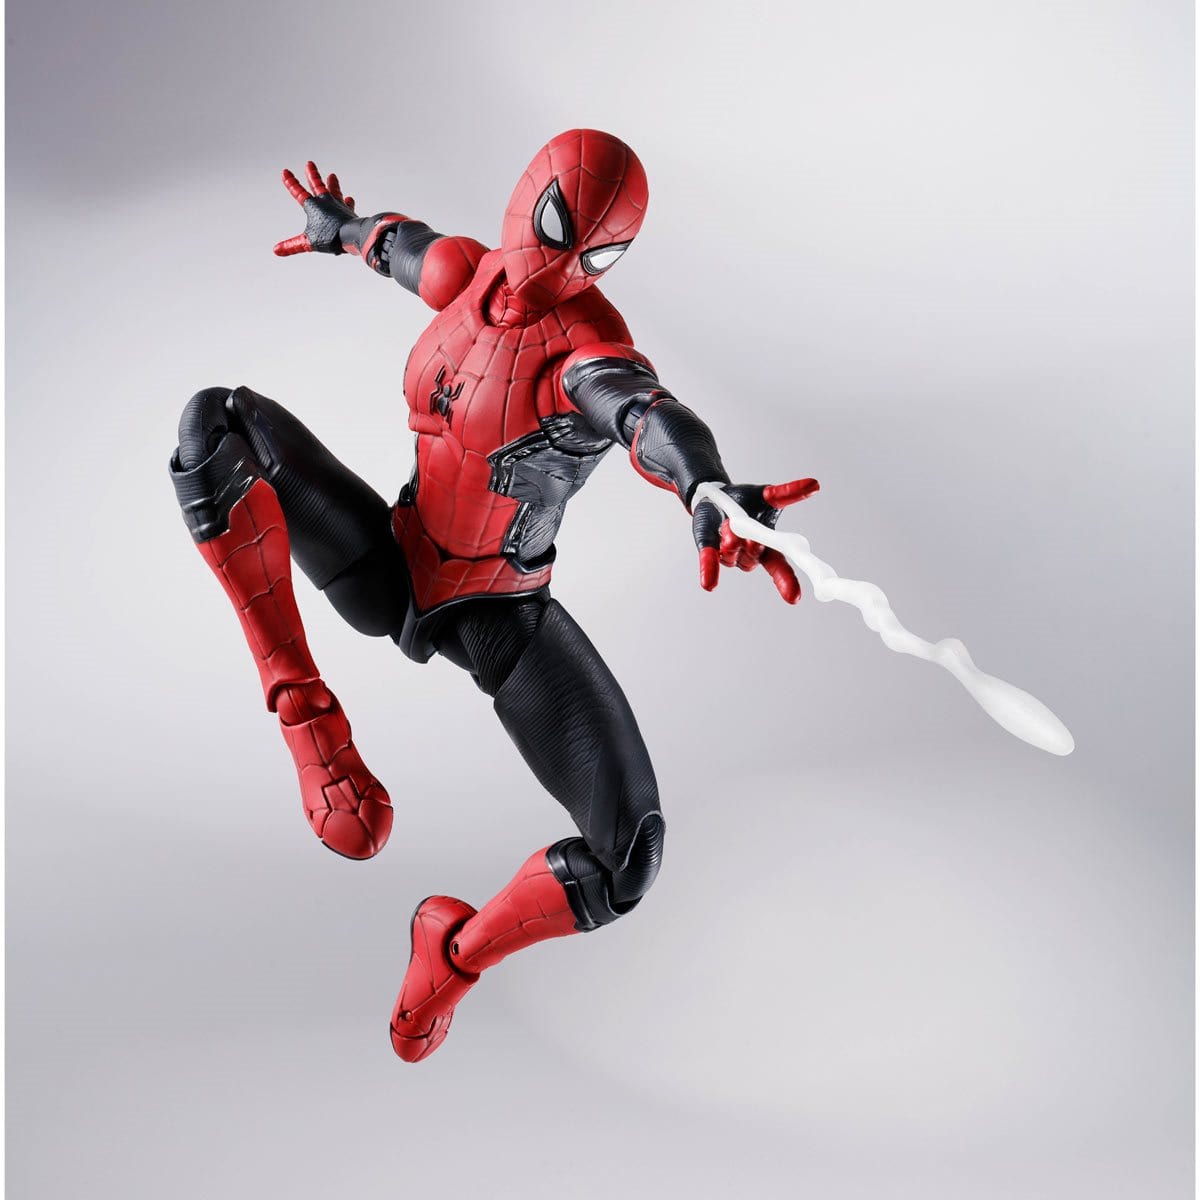 Spider-Man: No Way Home Spider-Man Upgraded Suit S.H.Figuarts Action Figure Media 8 of 8